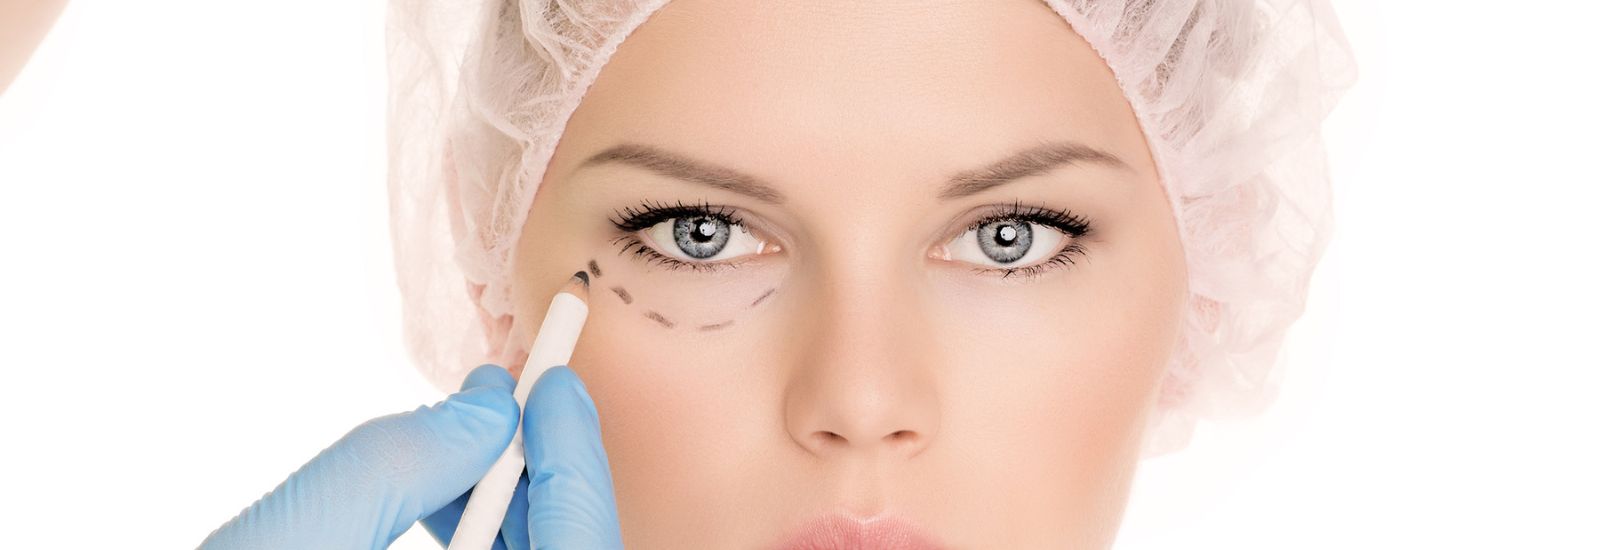 Patient at eyelid Surgery